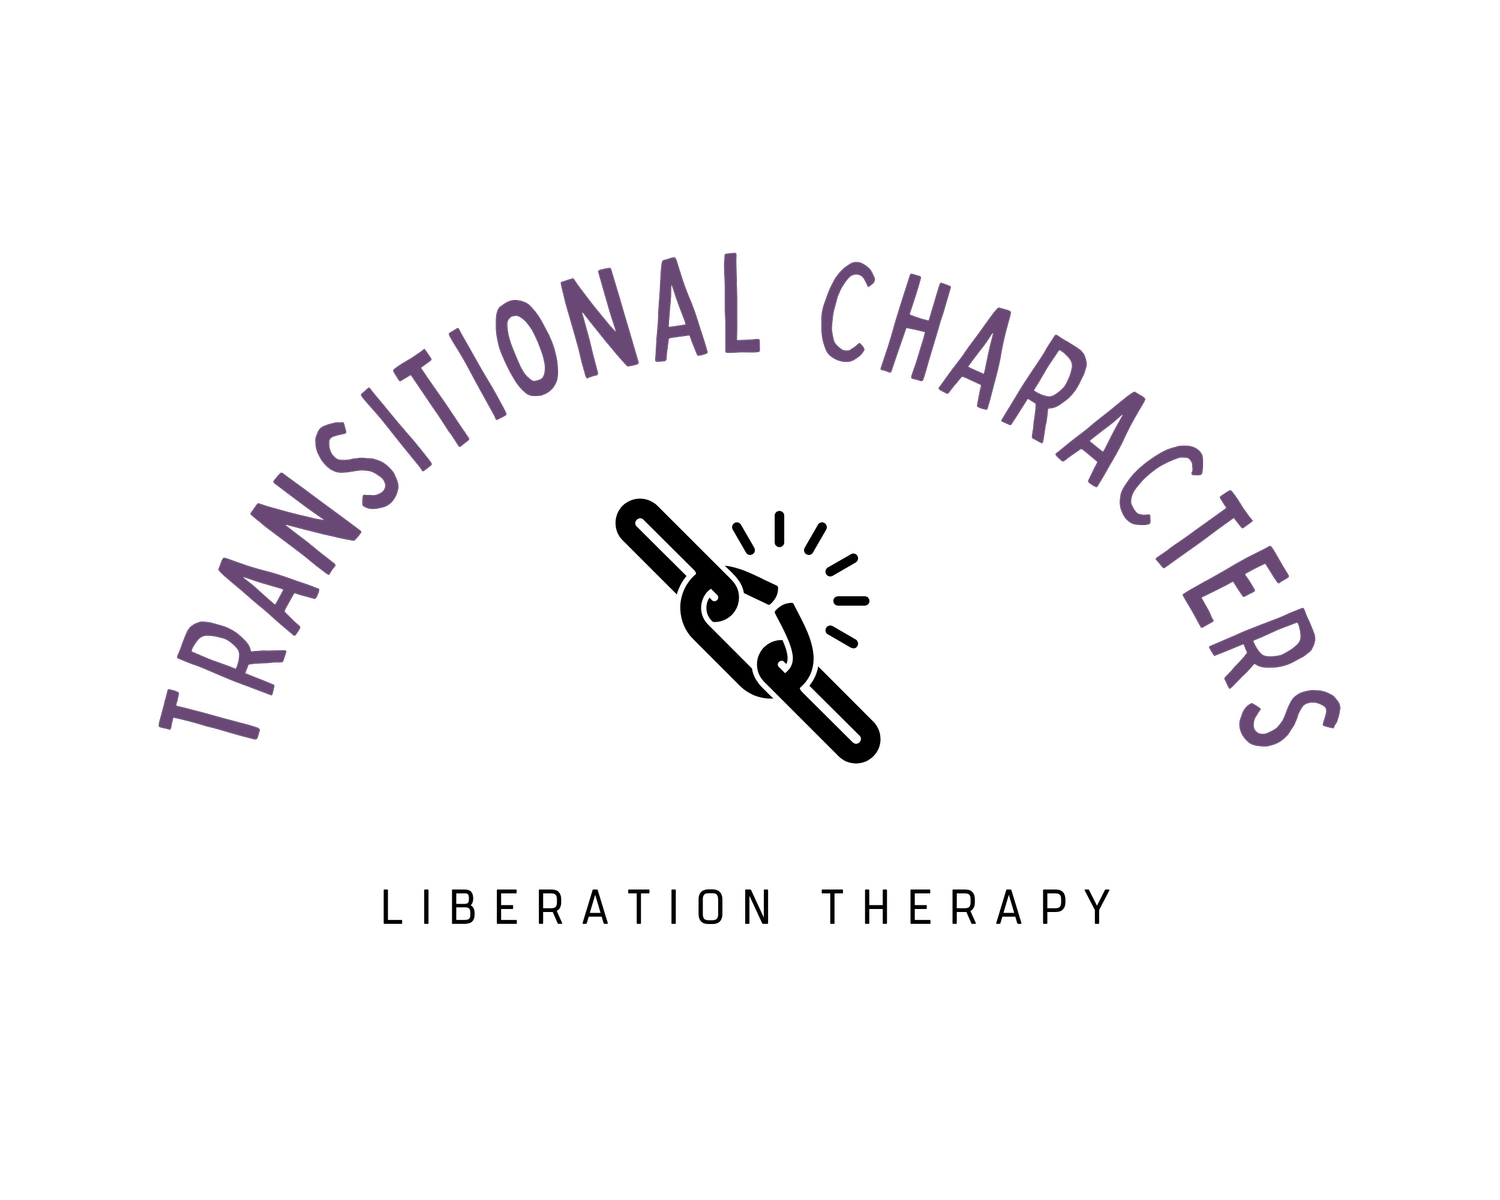 Transitional Characters